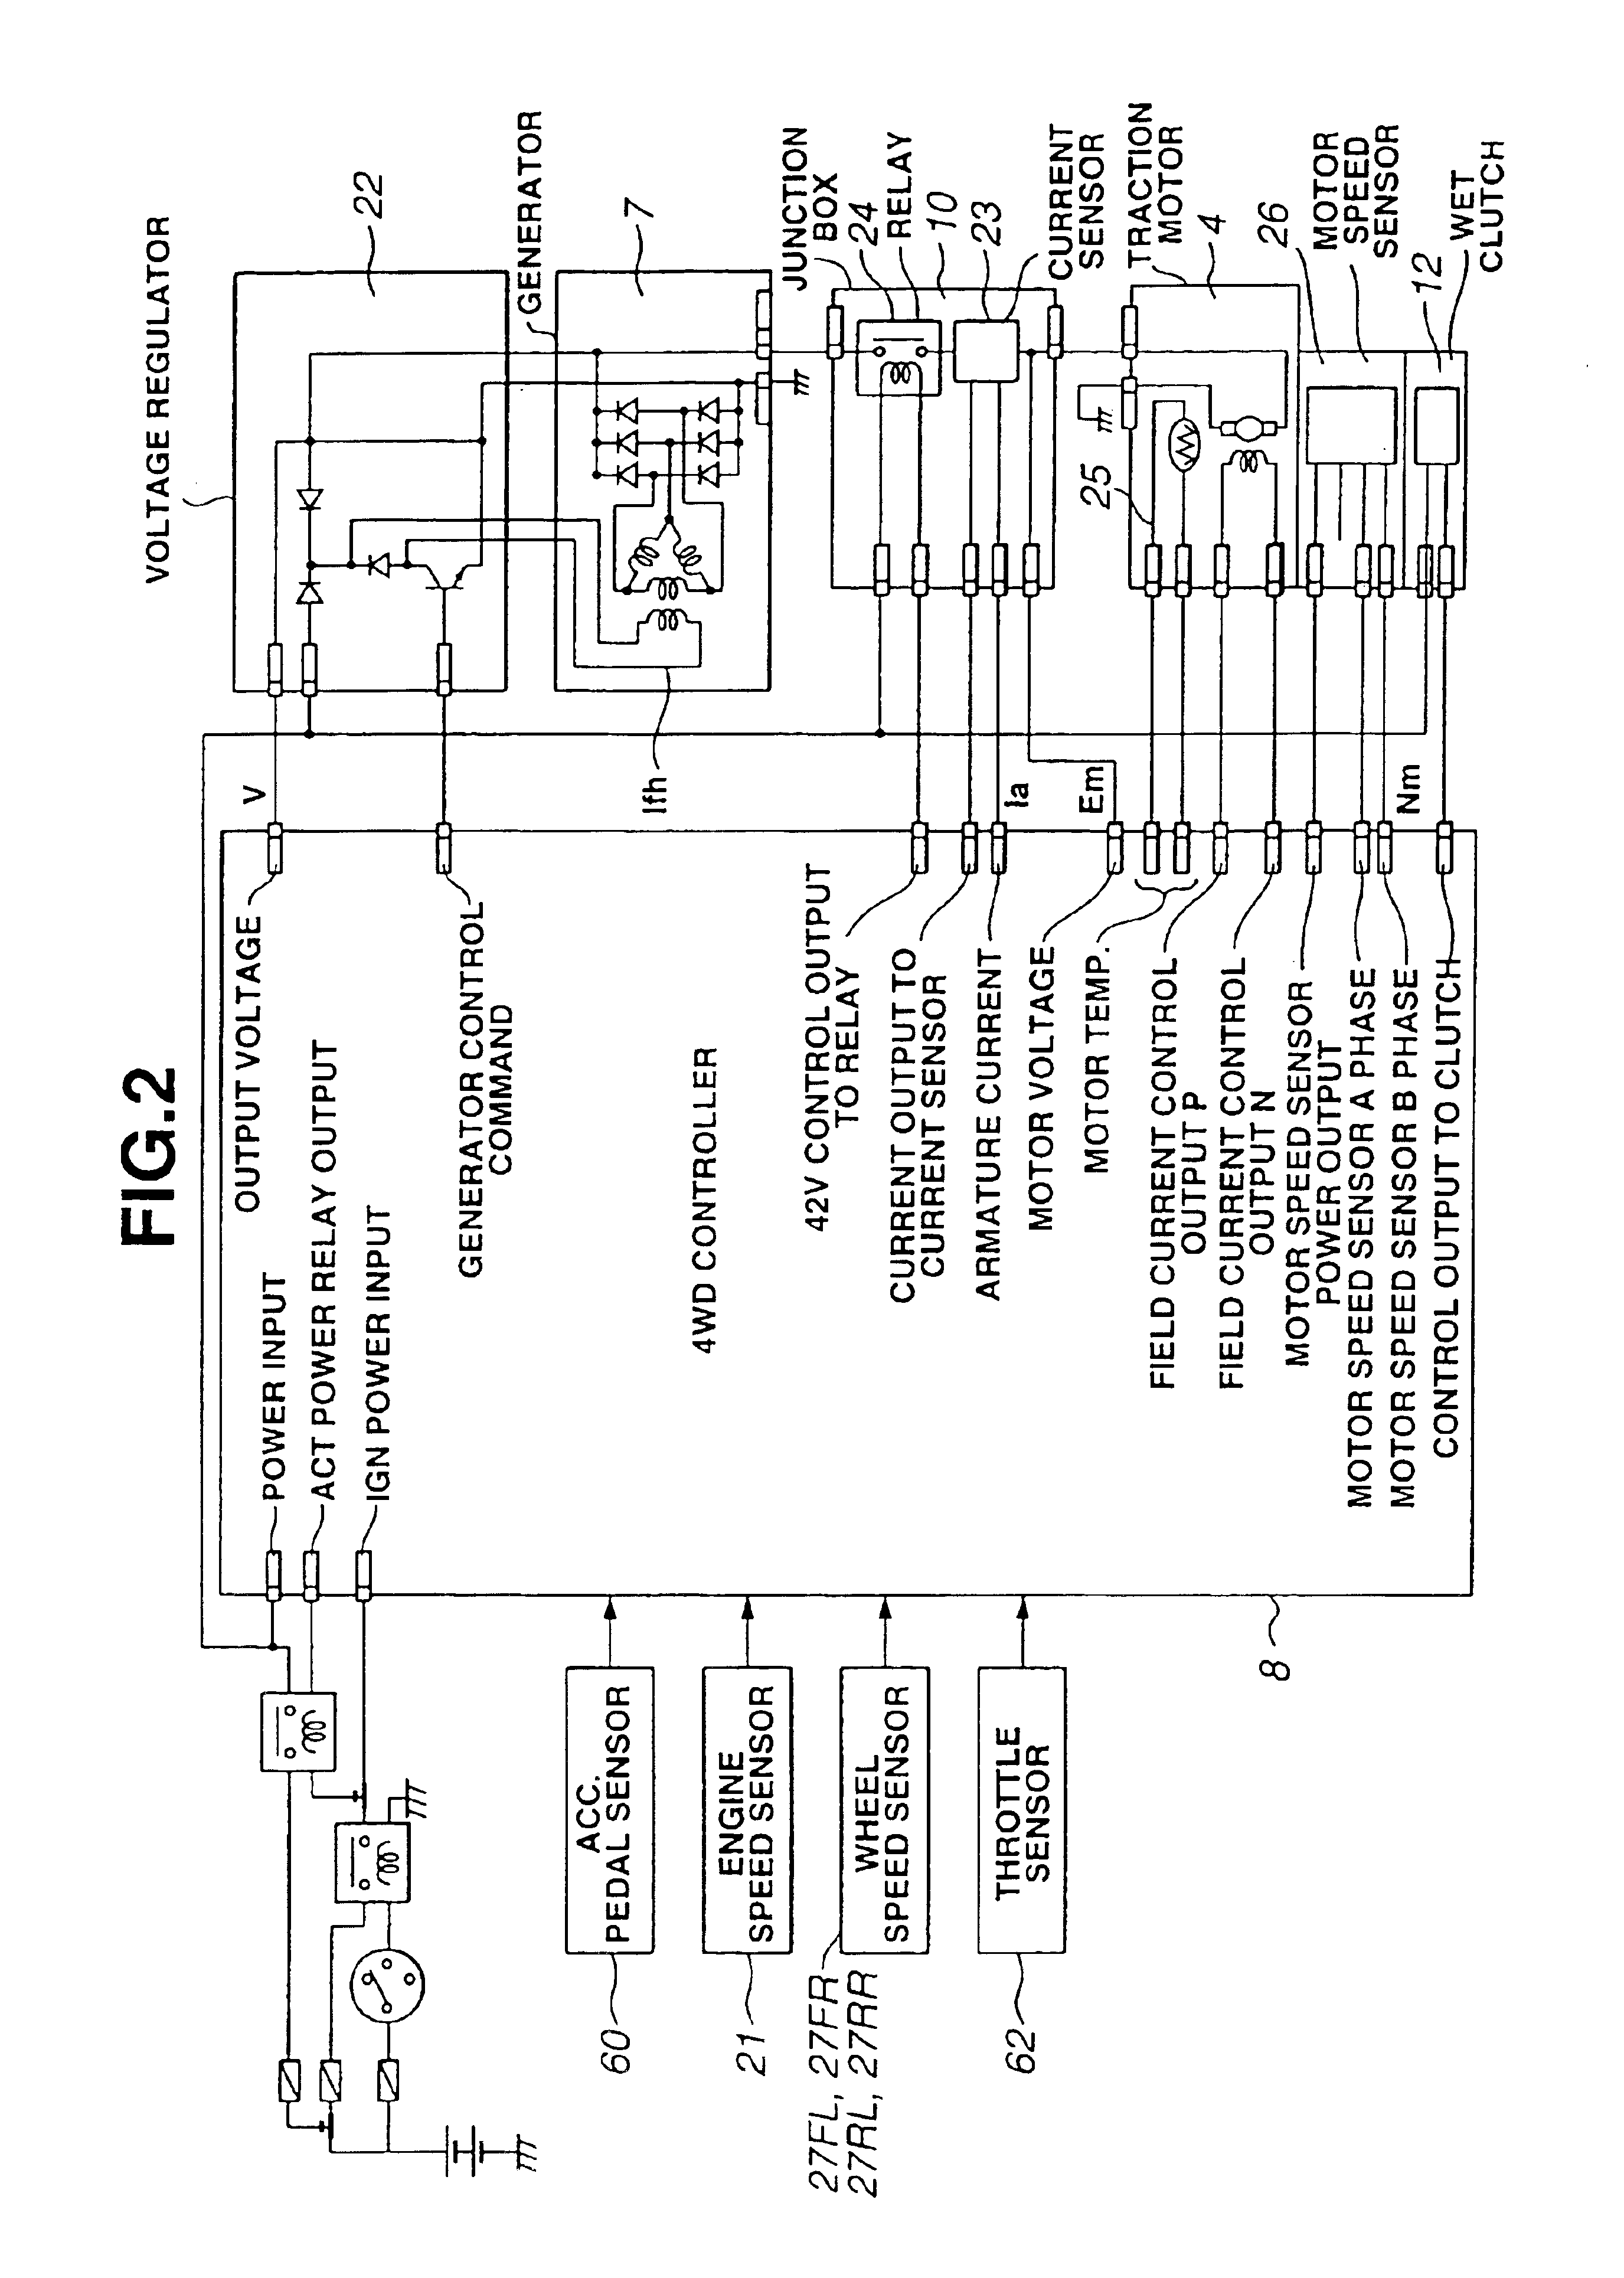 Control for vehicle including electric motor powered by engine driven generator